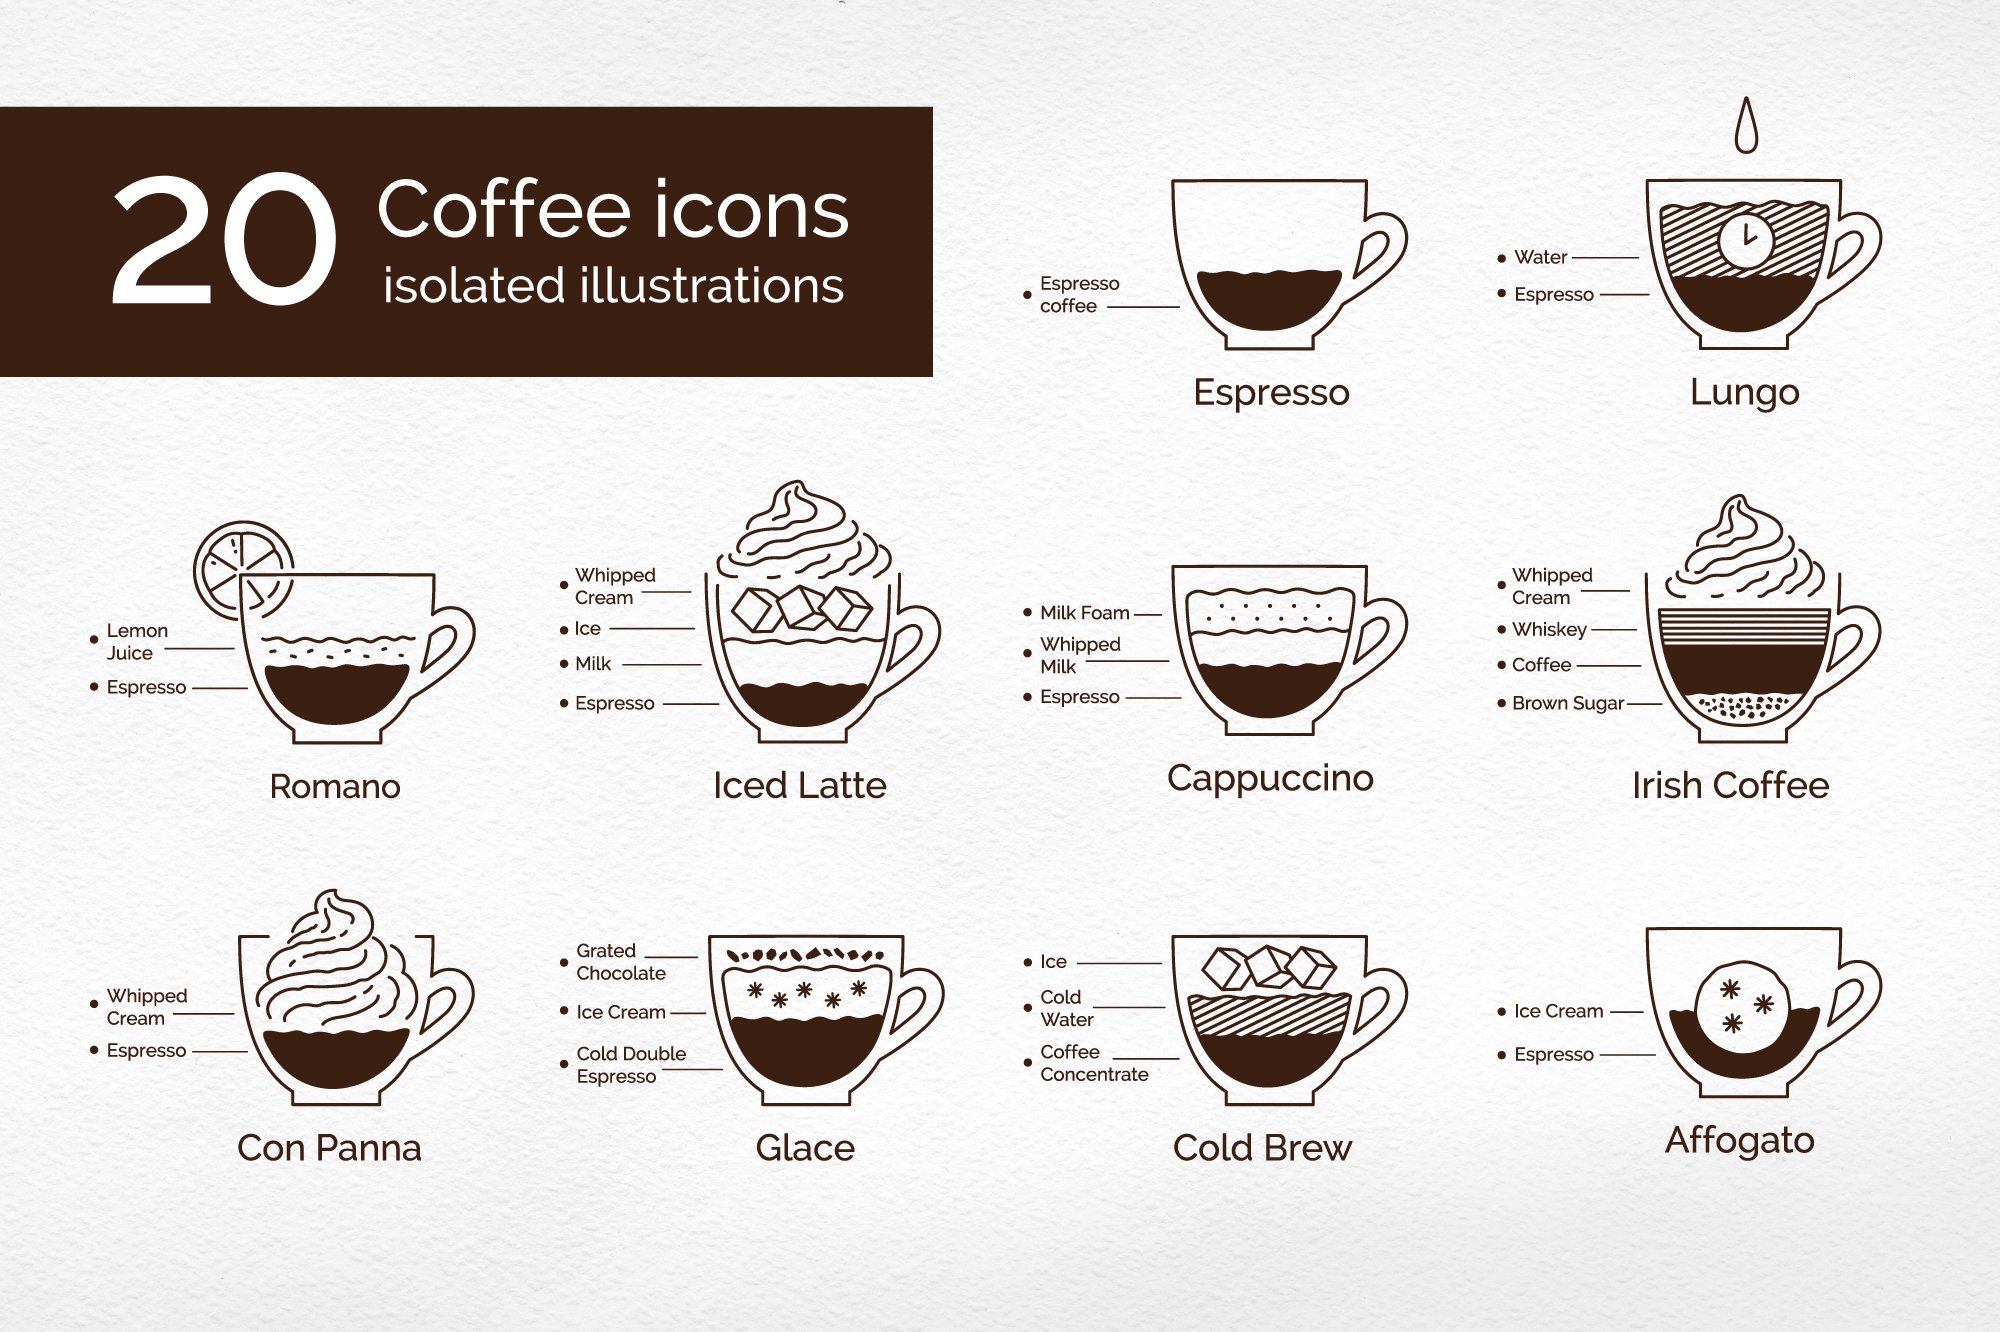 Coffee Recipes Icons cover image.